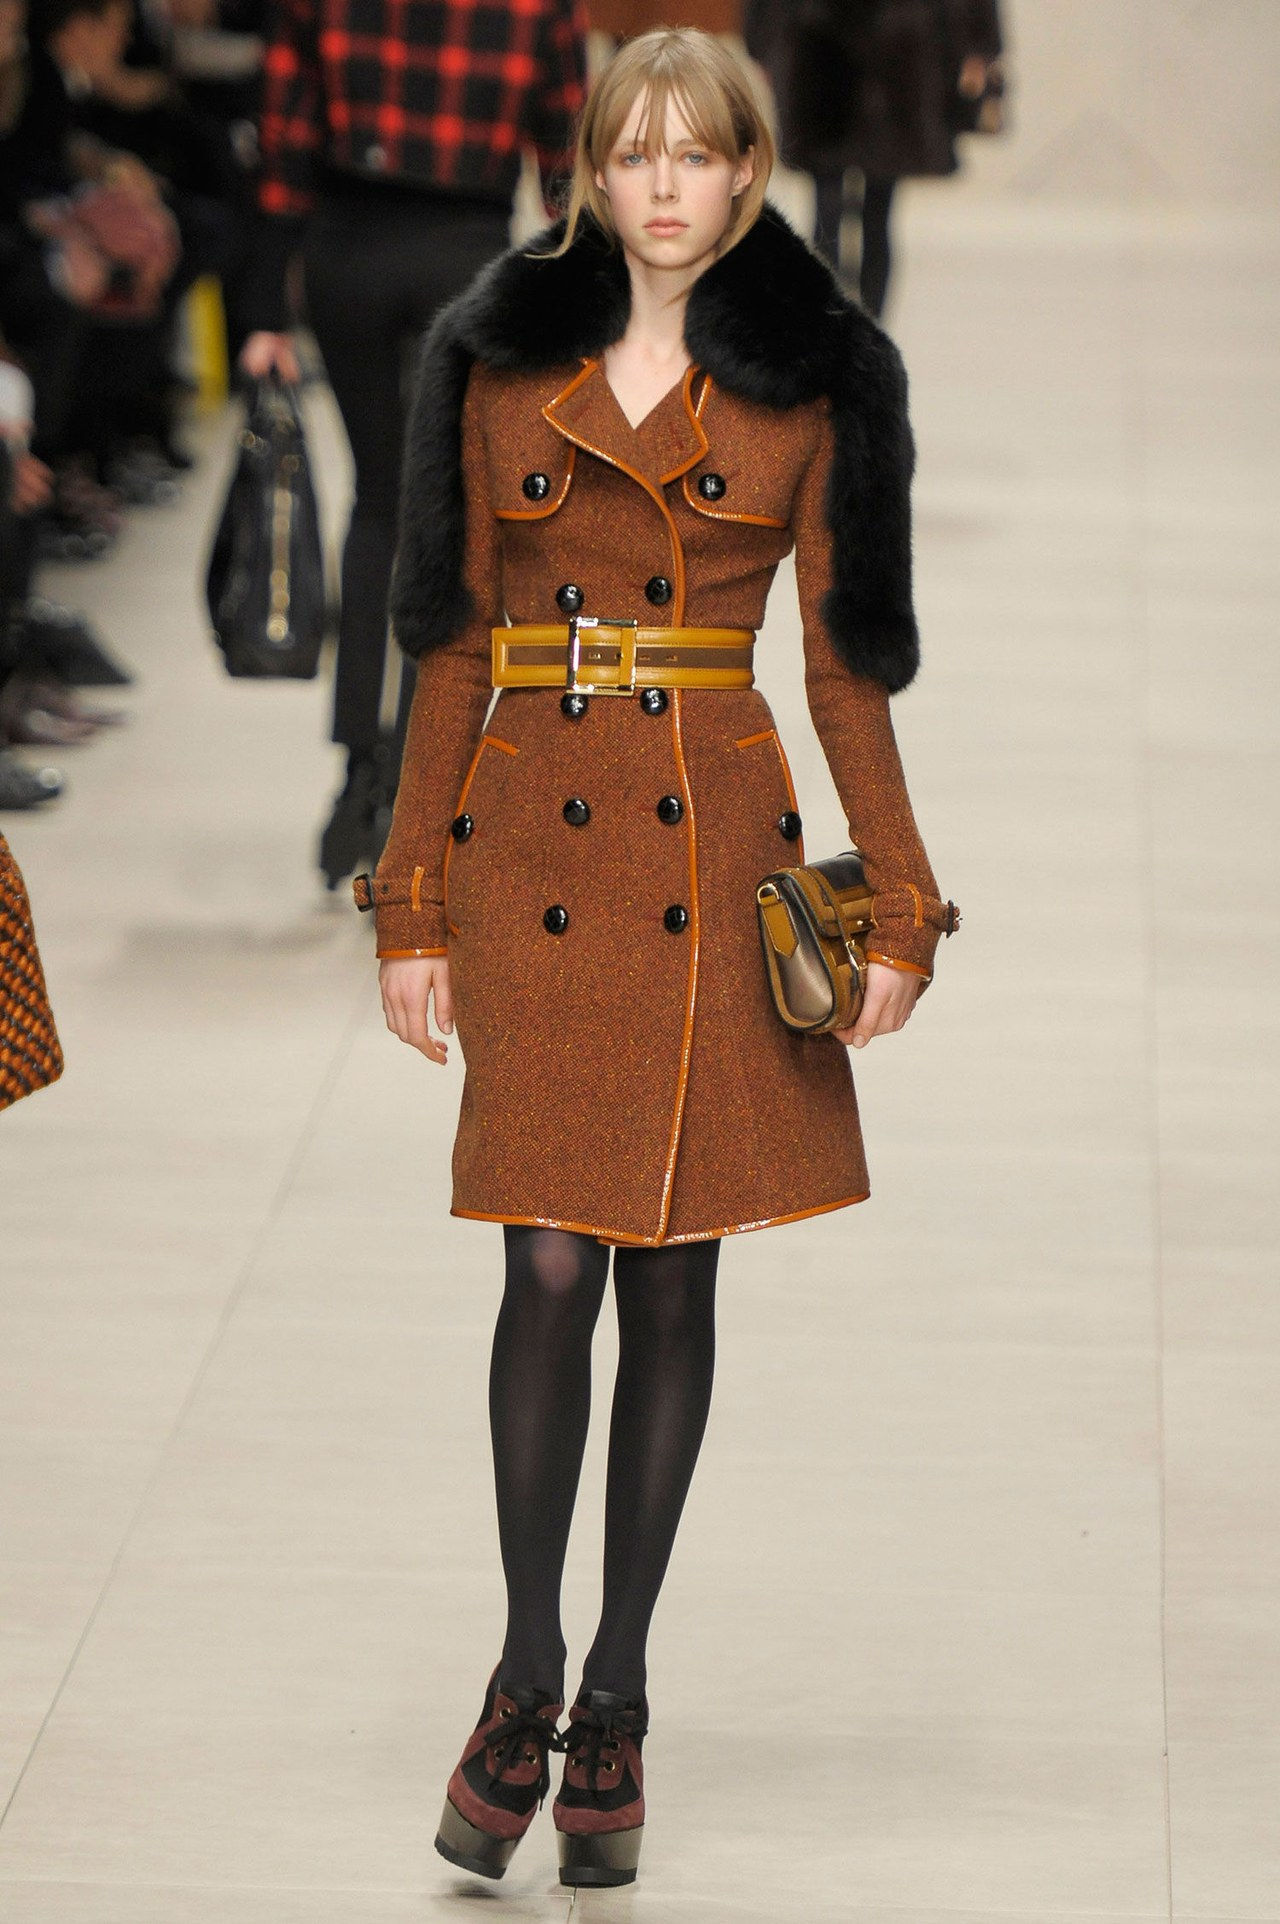 edie campbell first runway show burberry 2011